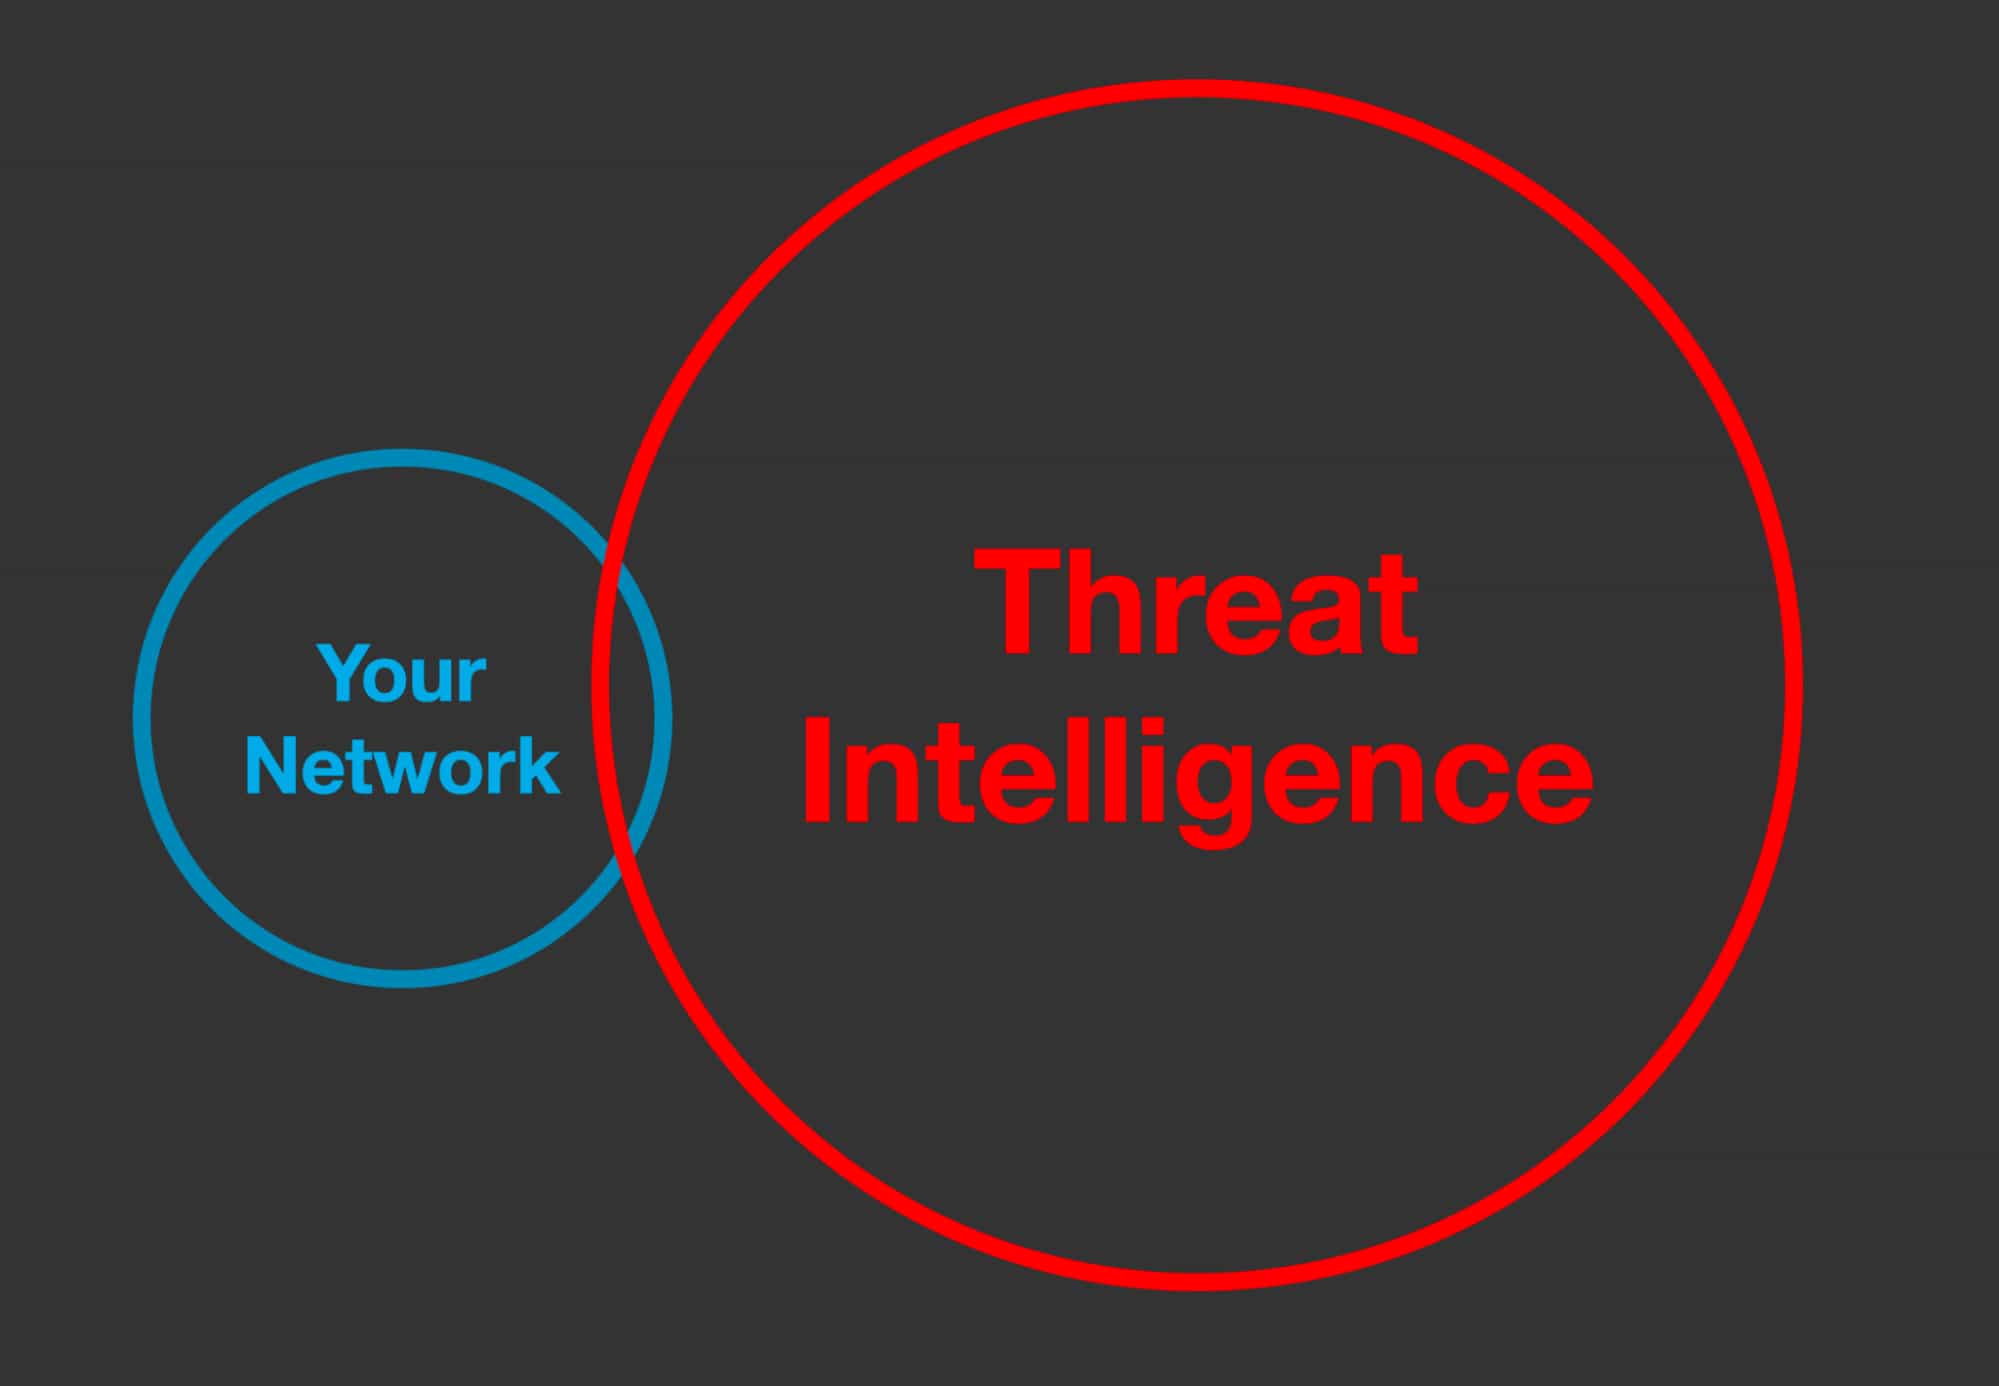 That little overlap in the Venn diagram represents where the data from external threat intel sources overlaps with what’s observed in your environment.